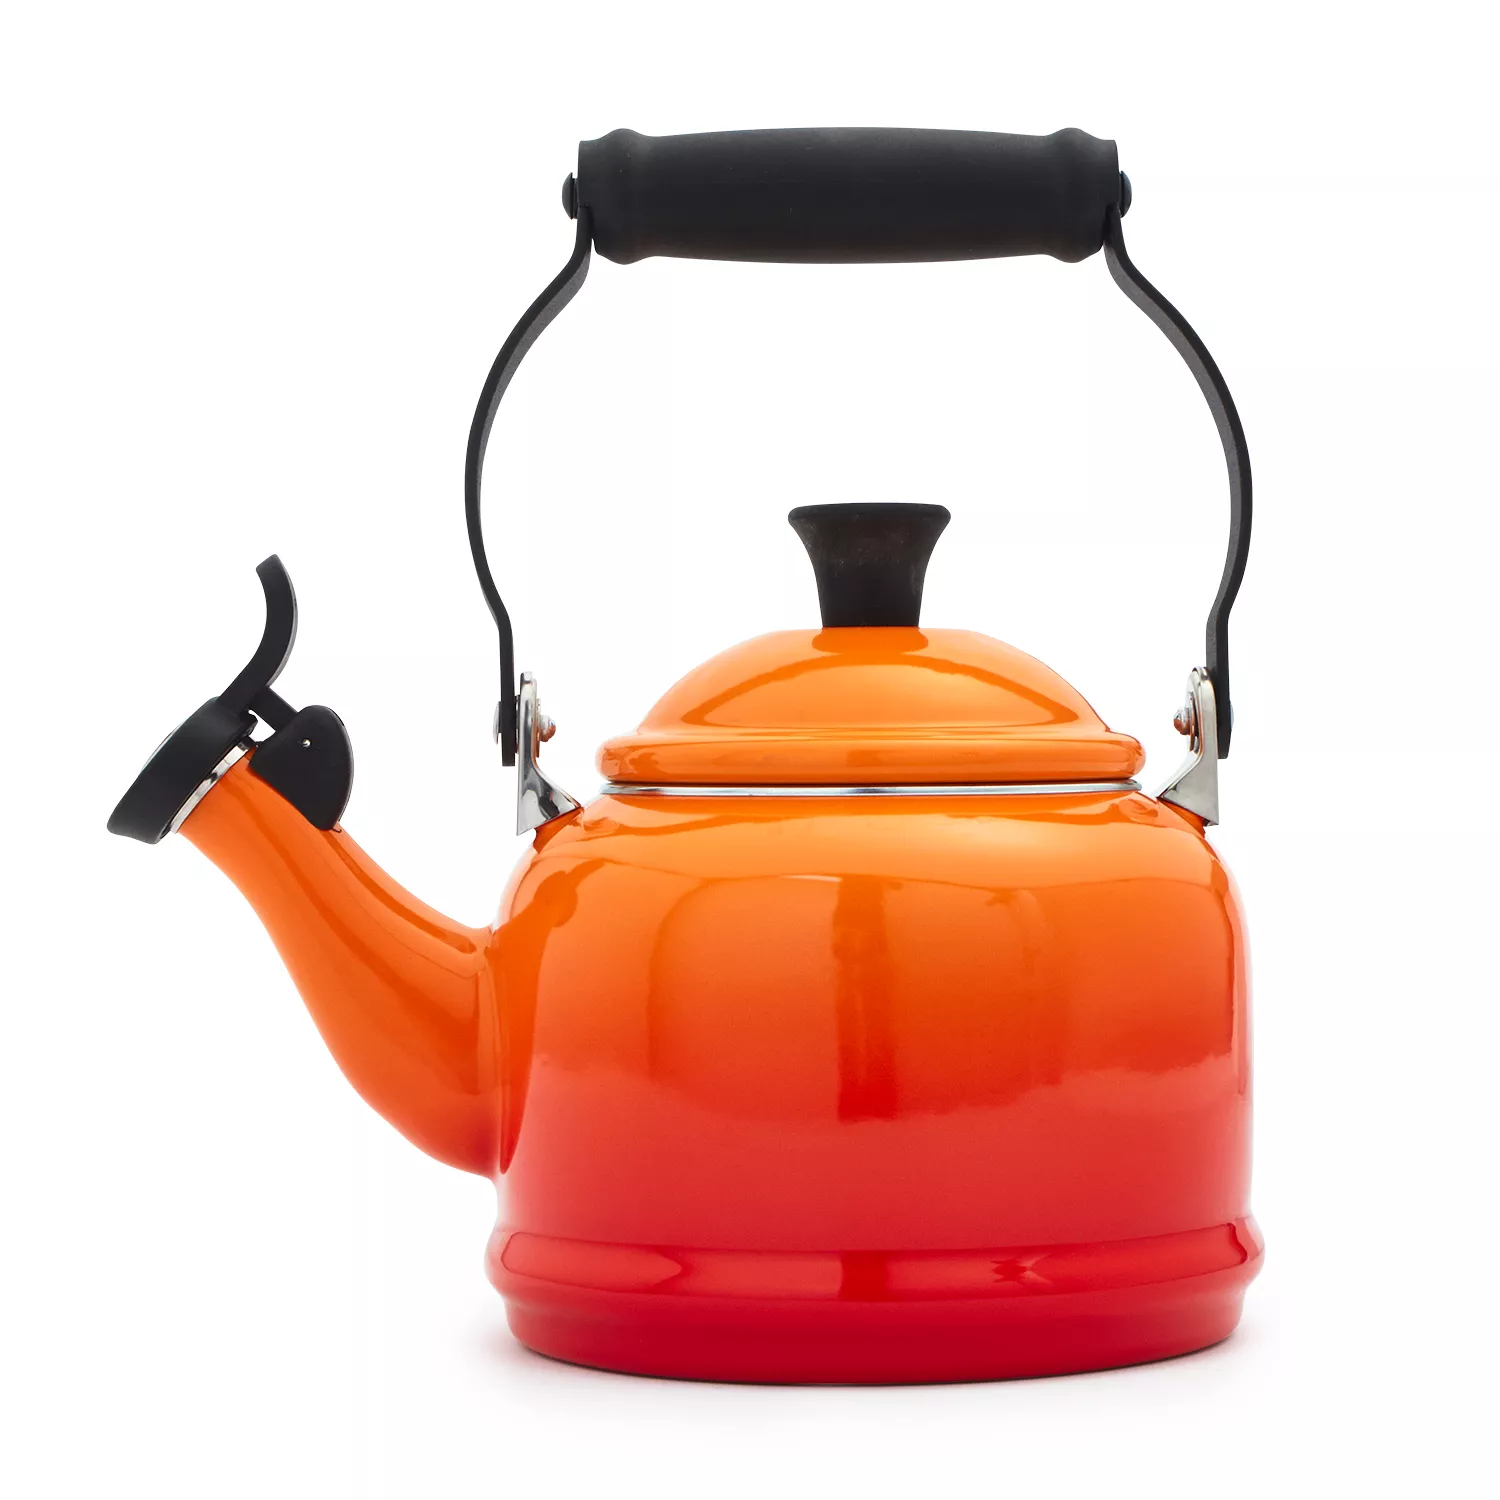 This Retro Tea Kettle Is $20 Off and Will Look So Cool On Your Countertop